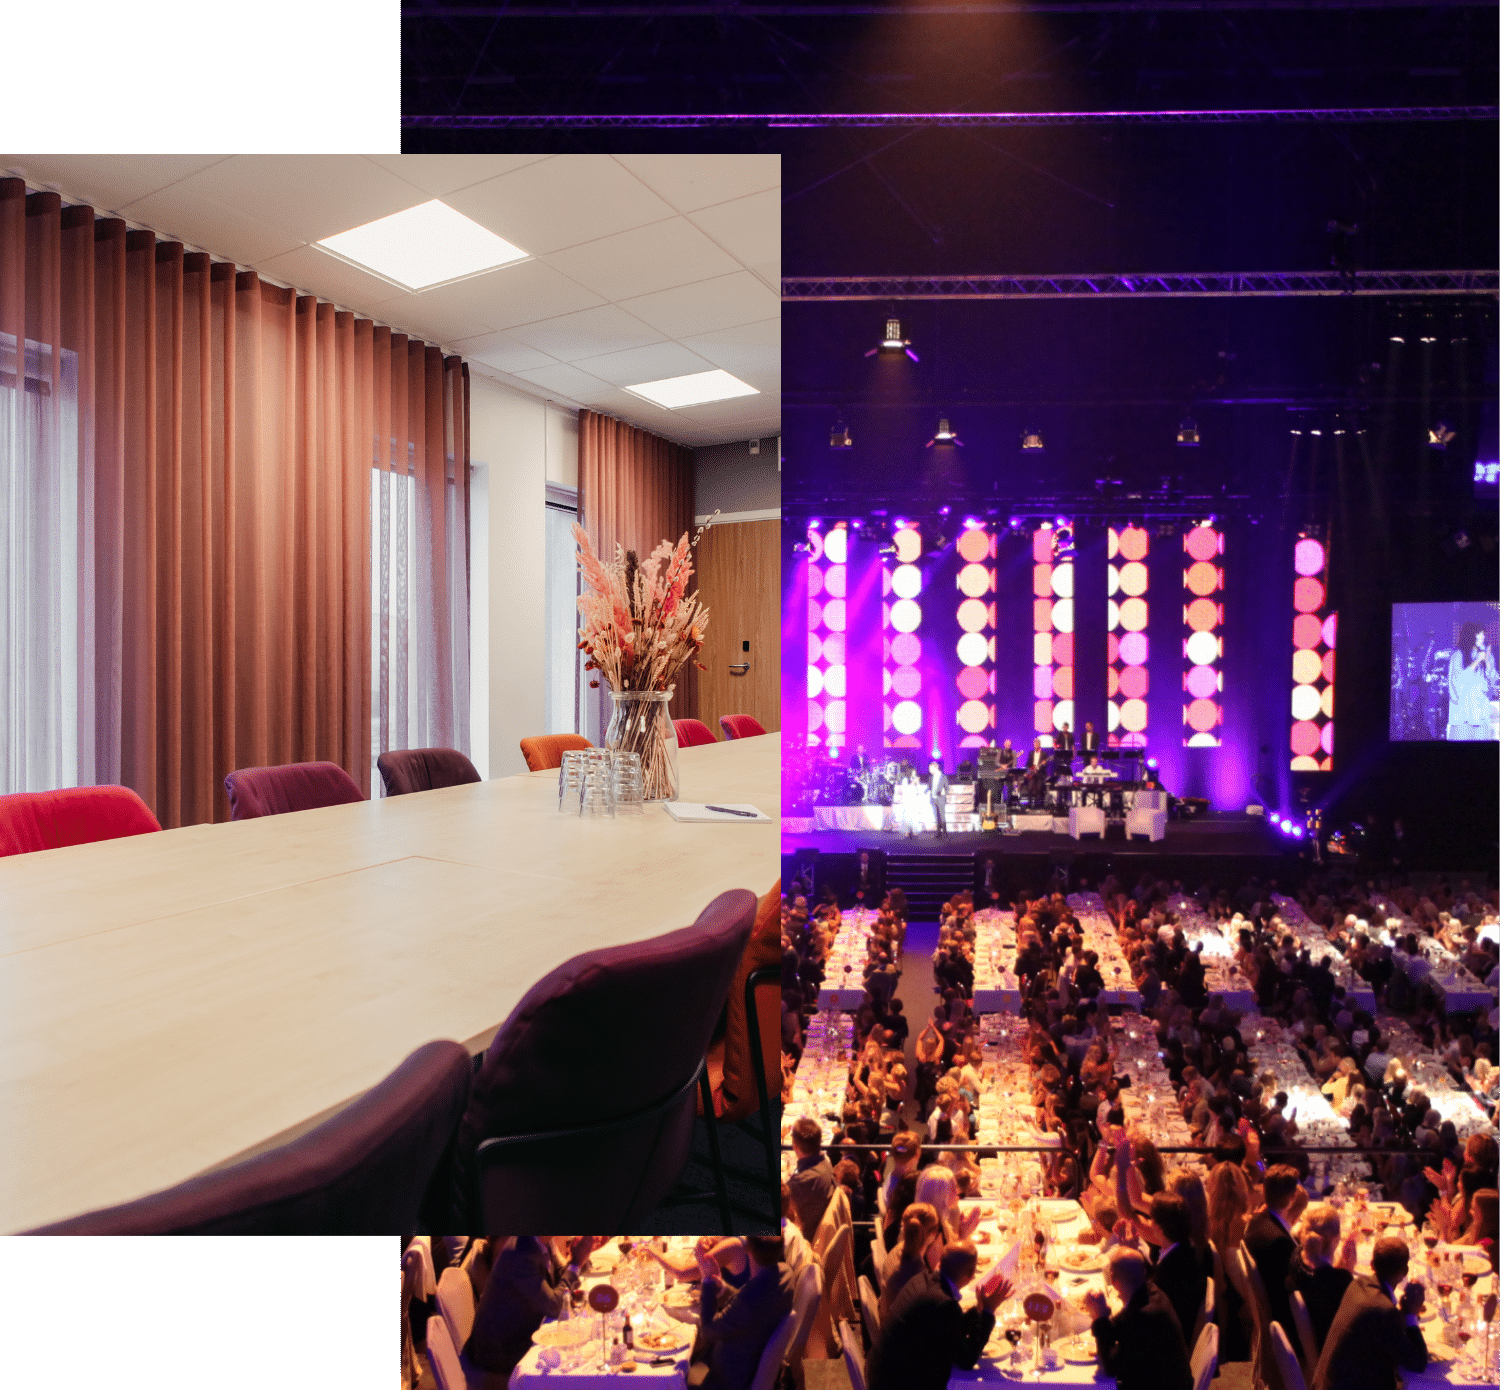 Two different conference rooms. A smaller one with a wooden table and purple chairs. A larger one with set long tables and a stage with lighting.